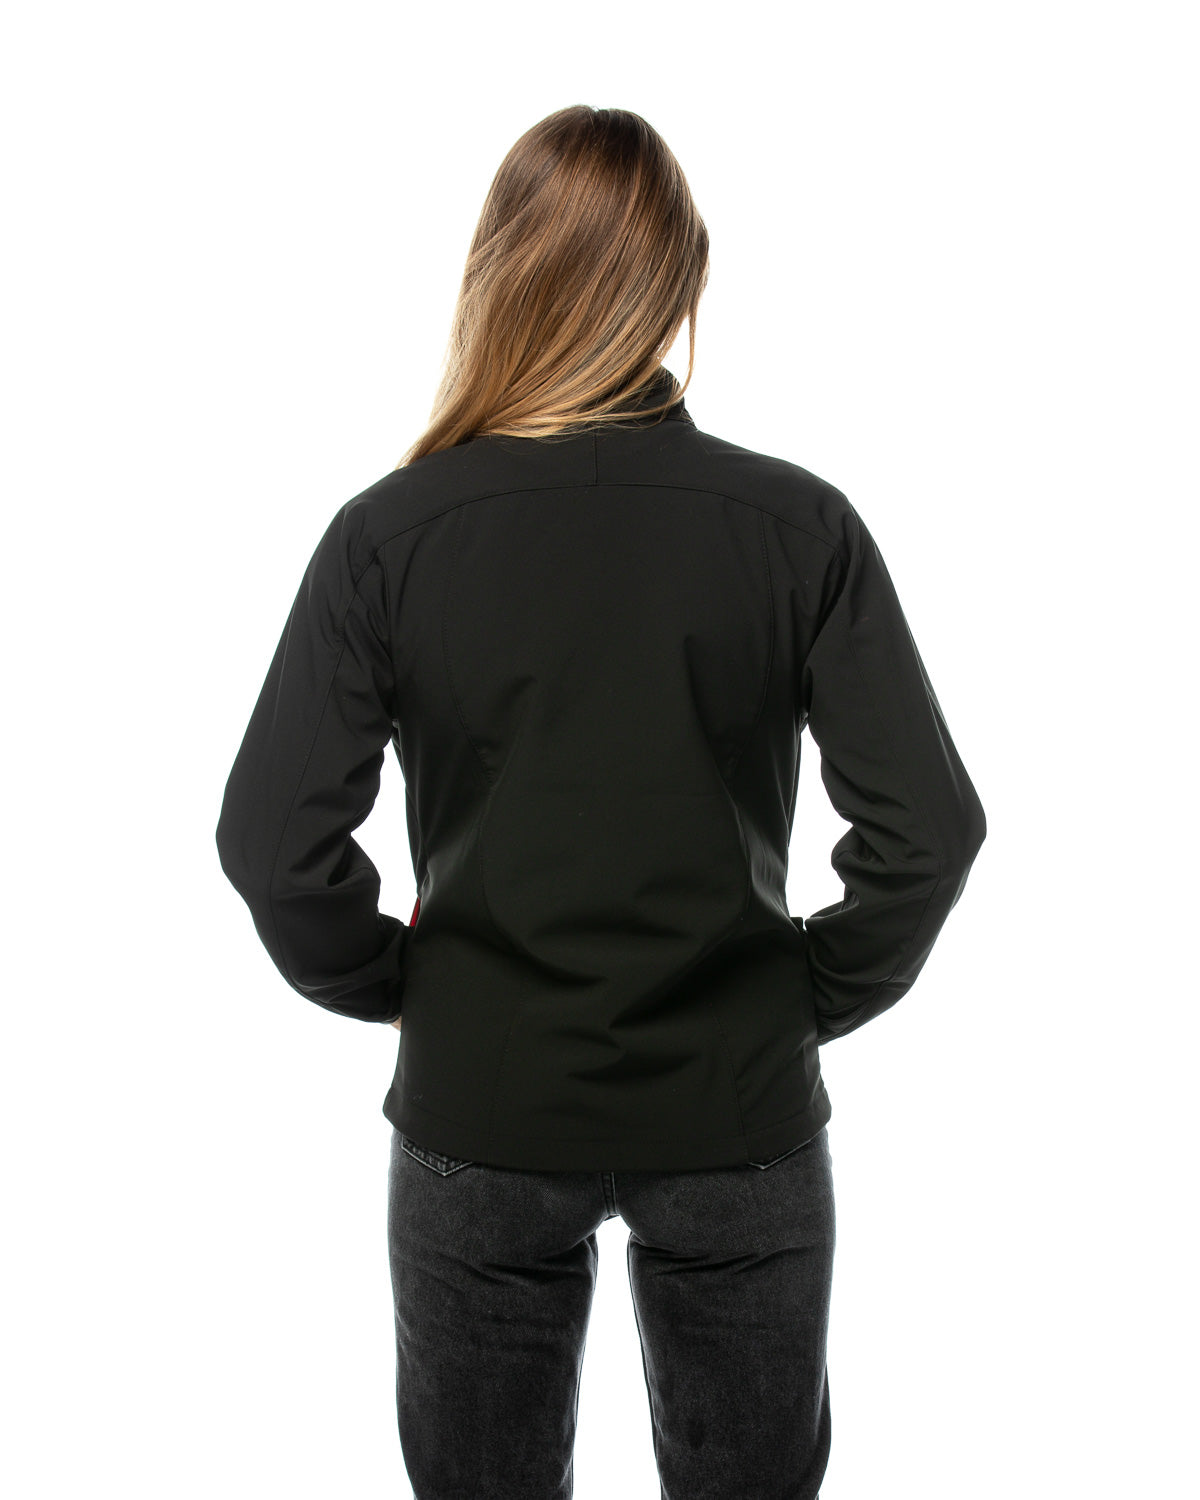 Women's Griffith softshell jacket